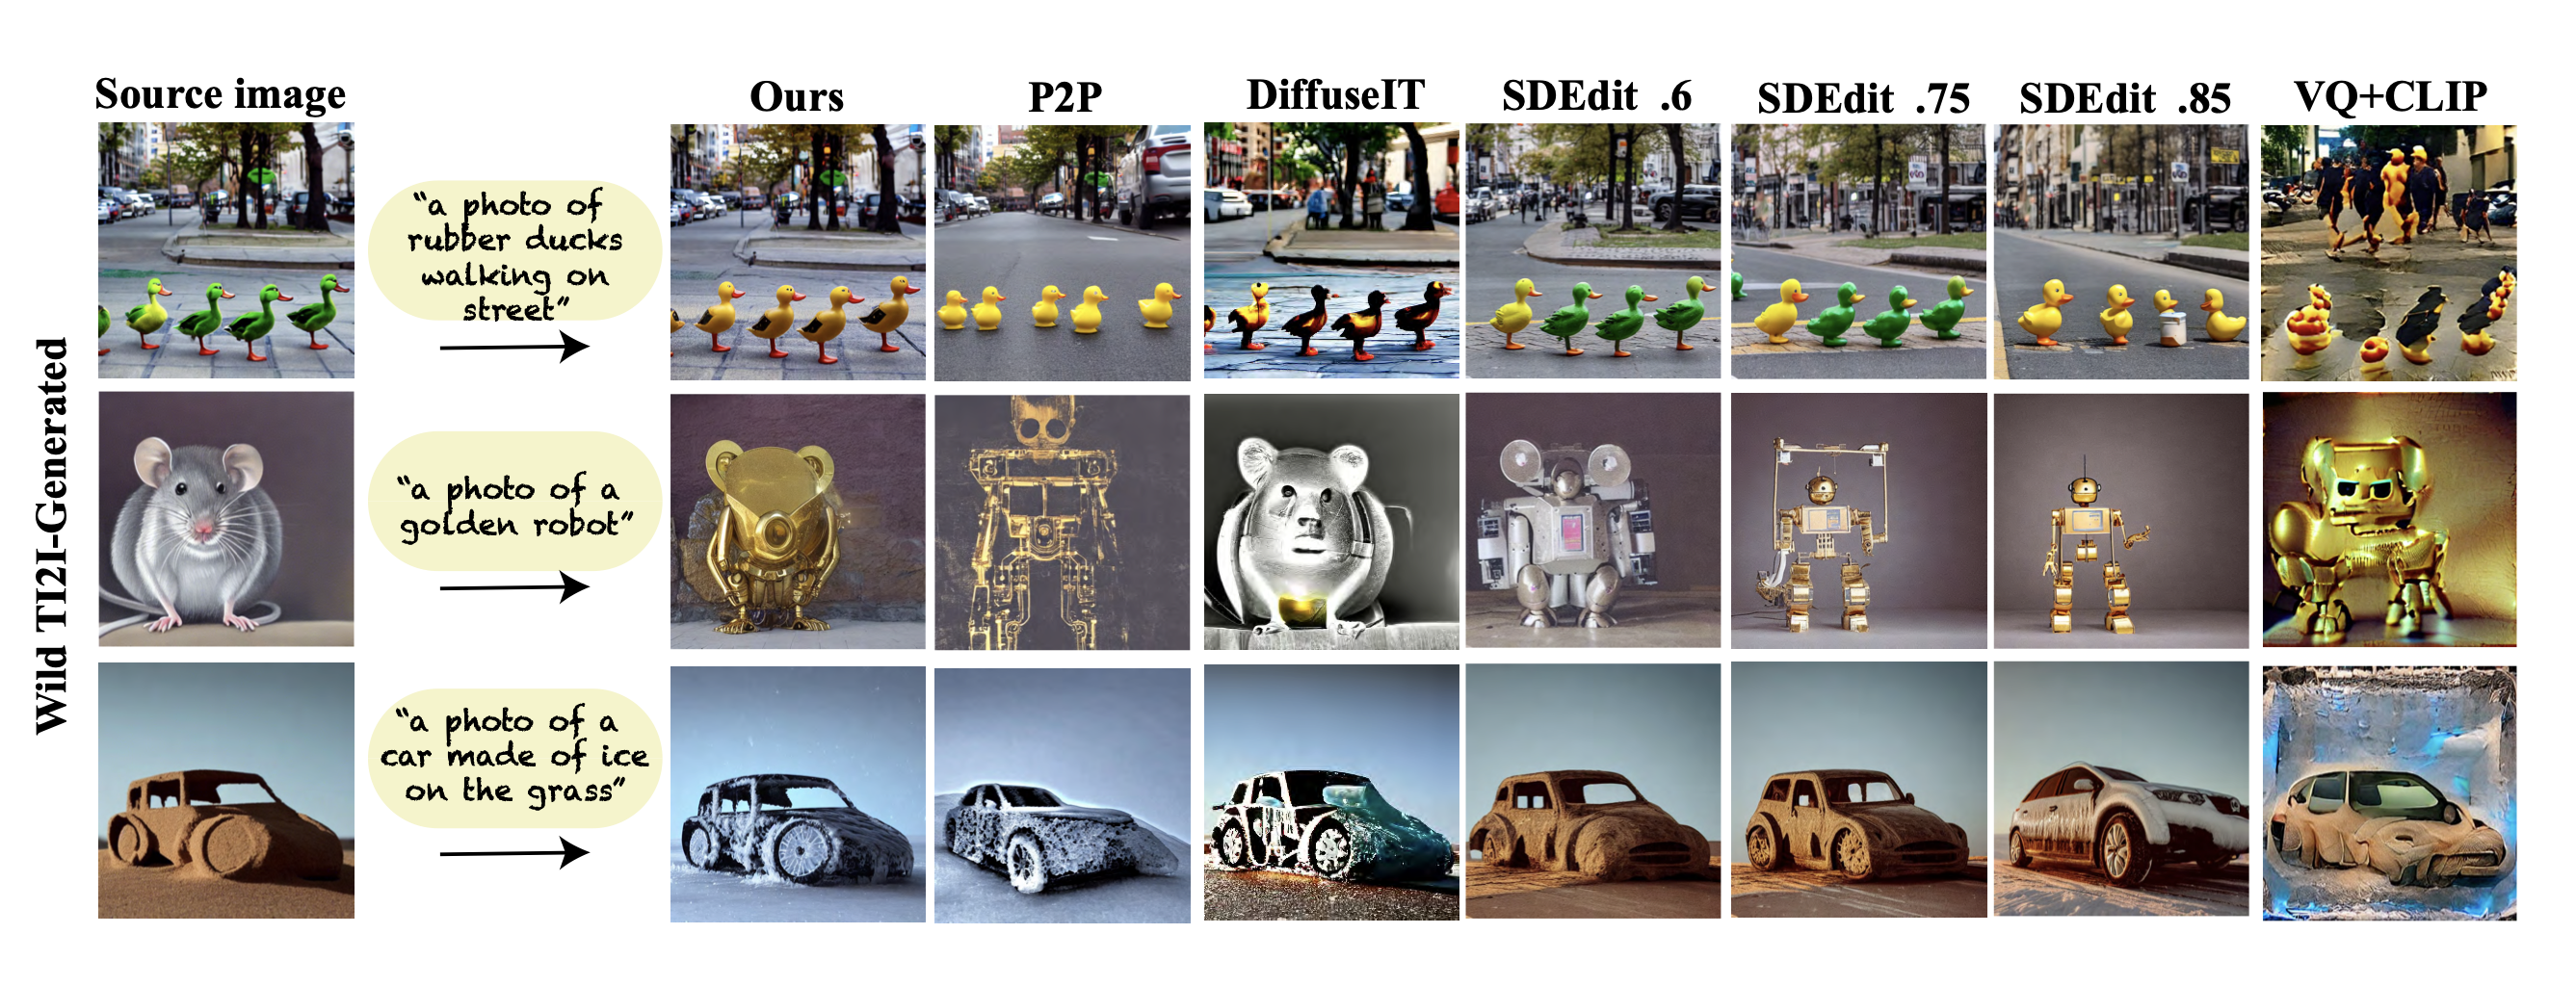 A grid of images showing the source image and seven comparison outputs across different models. The PnP DFs outperform the others.